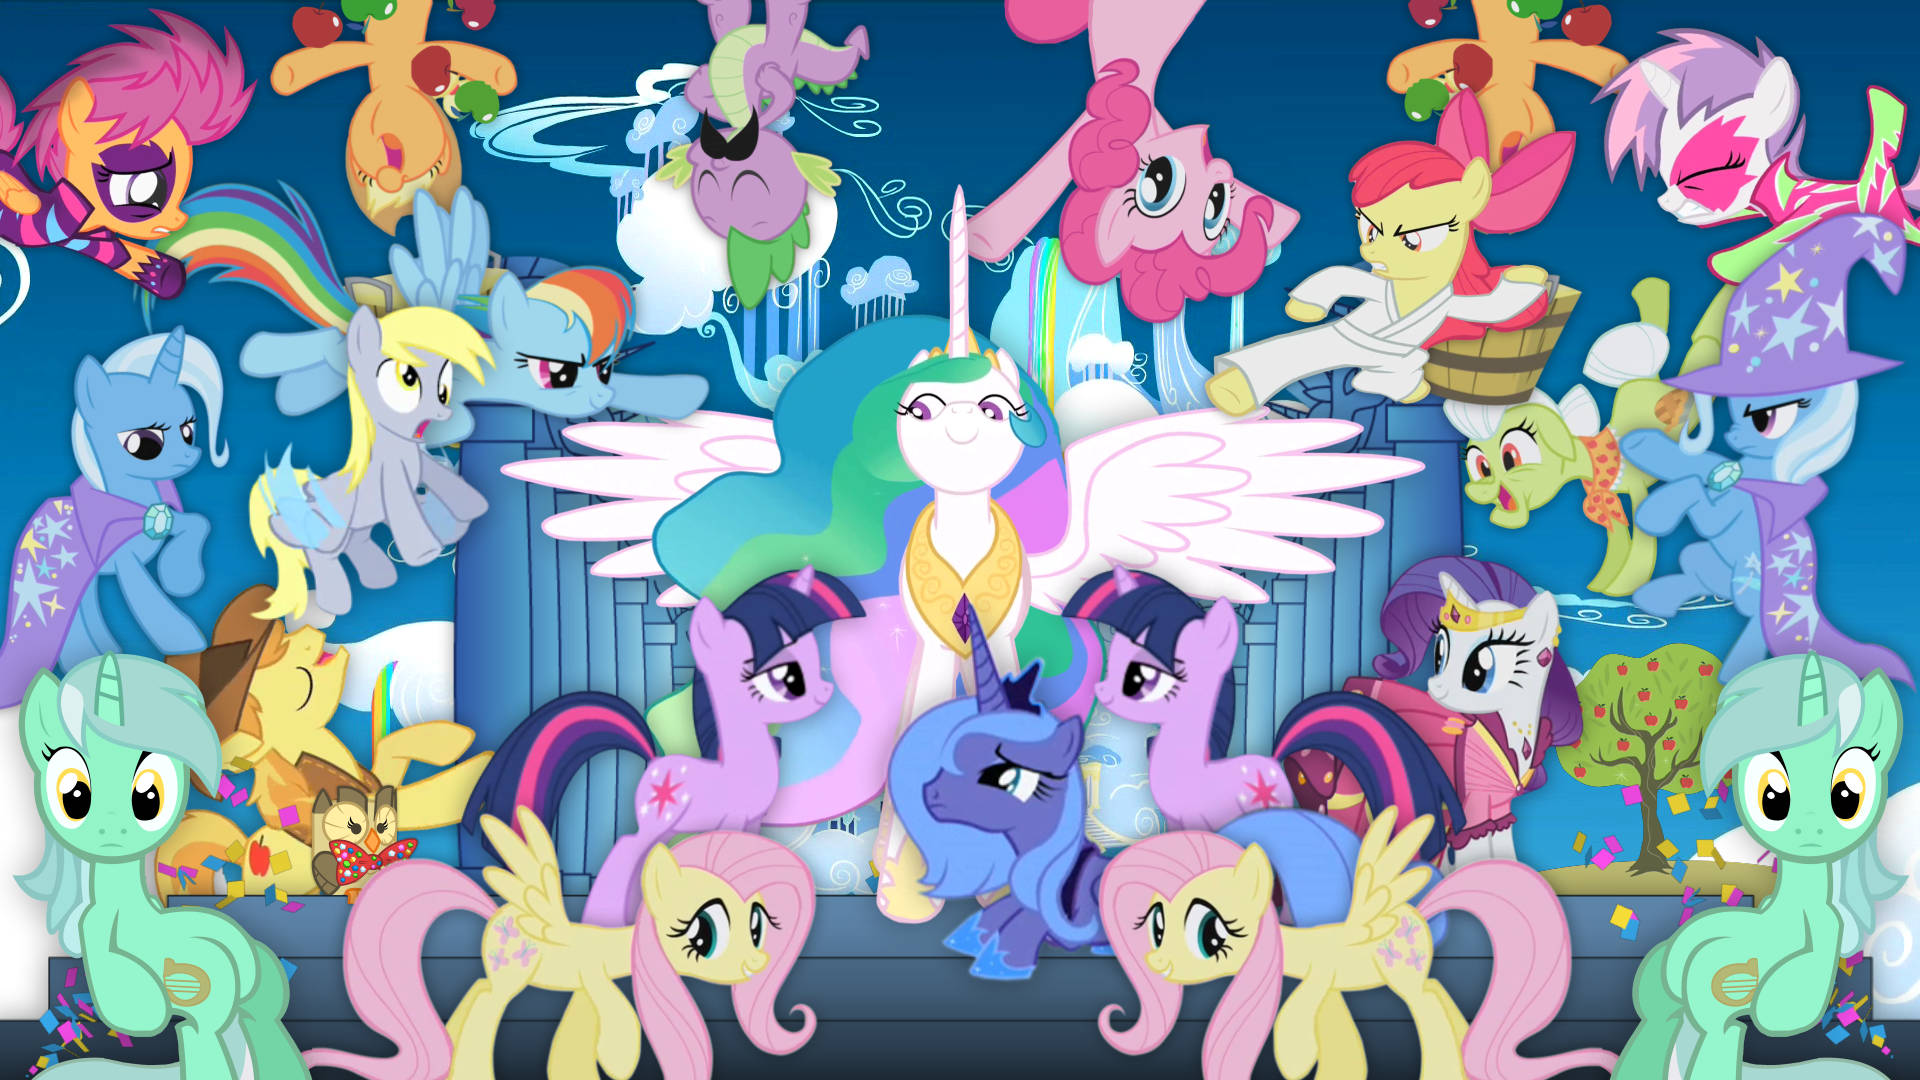 Enjoy An Amazingly Colorful Desktop With My Little Pony Background